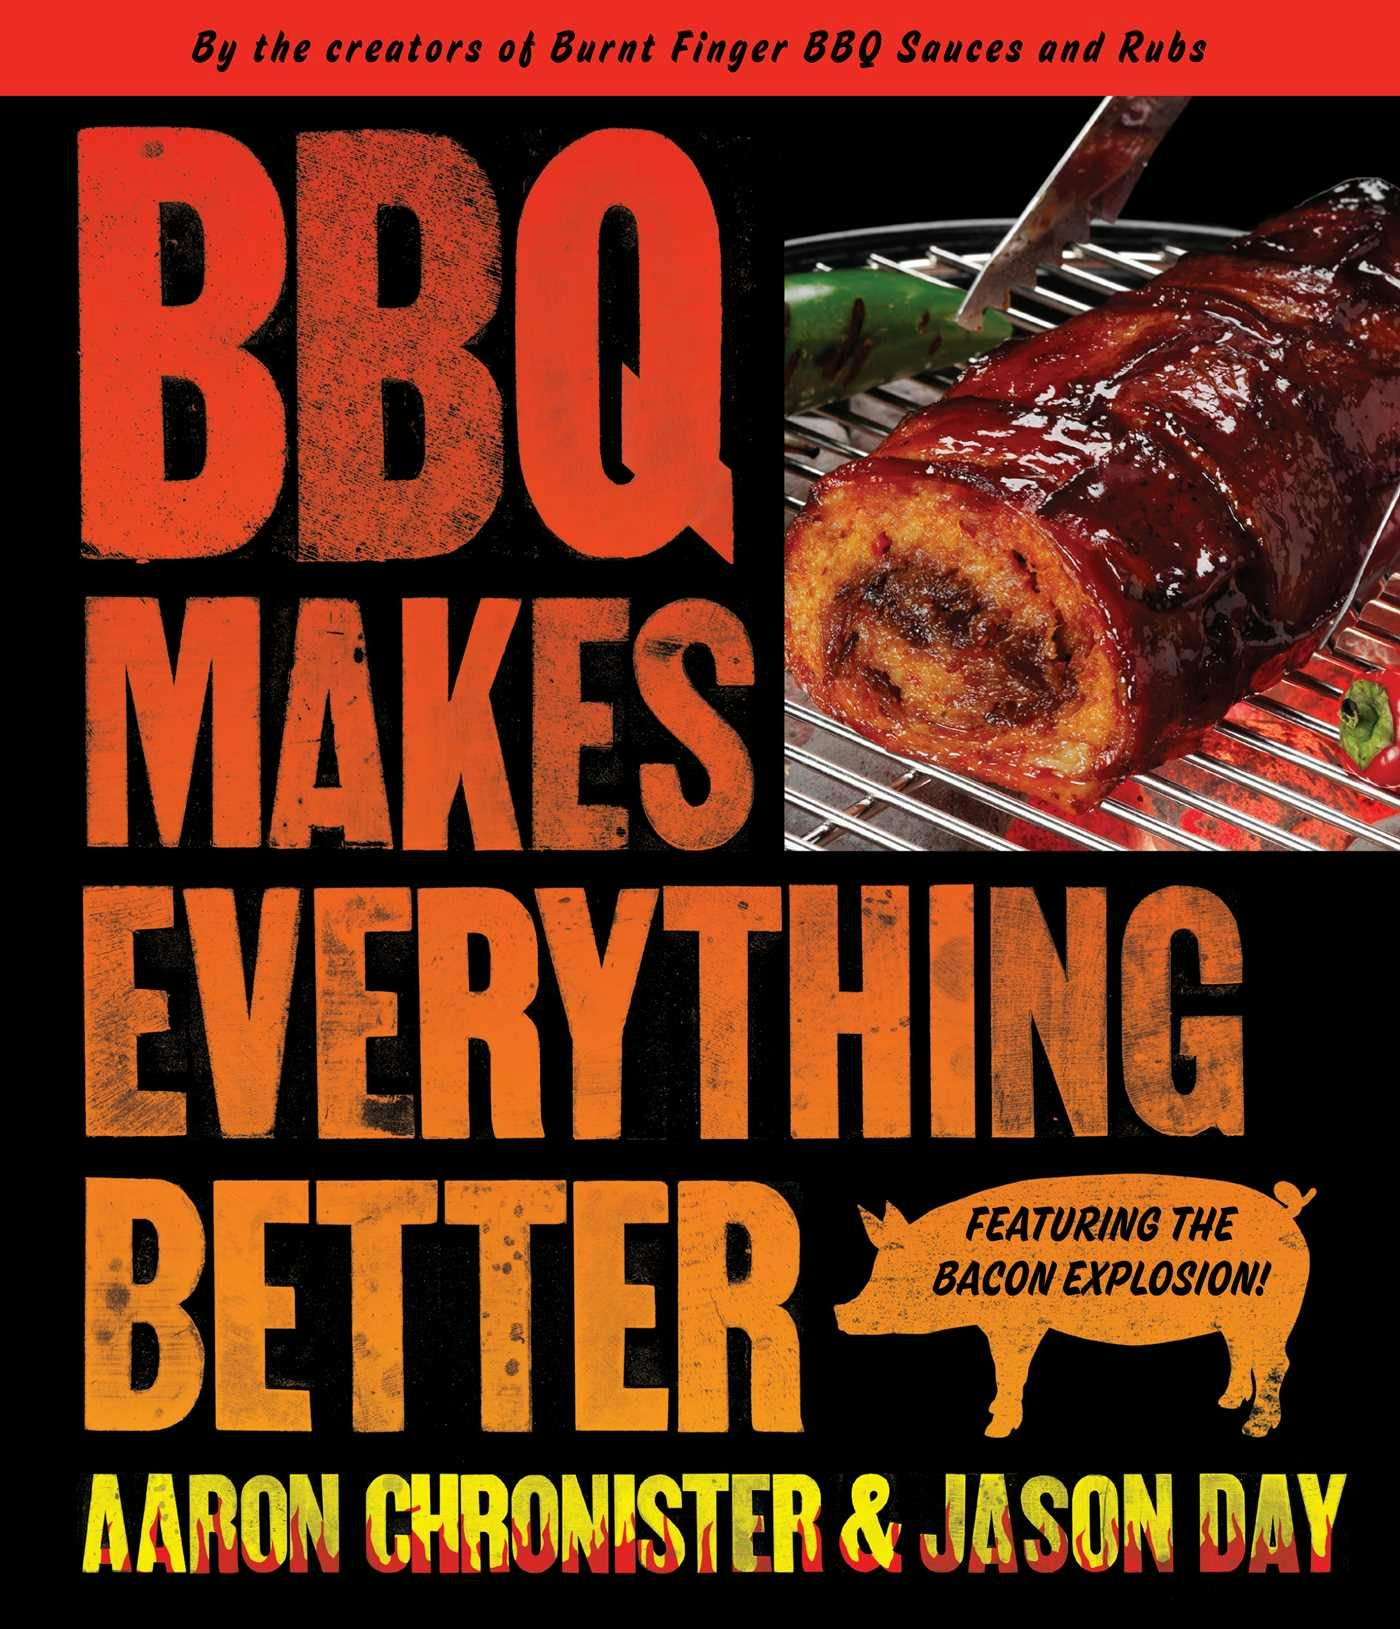 BBQ Makes Everything Better - Aaron Chronister, Jason Day